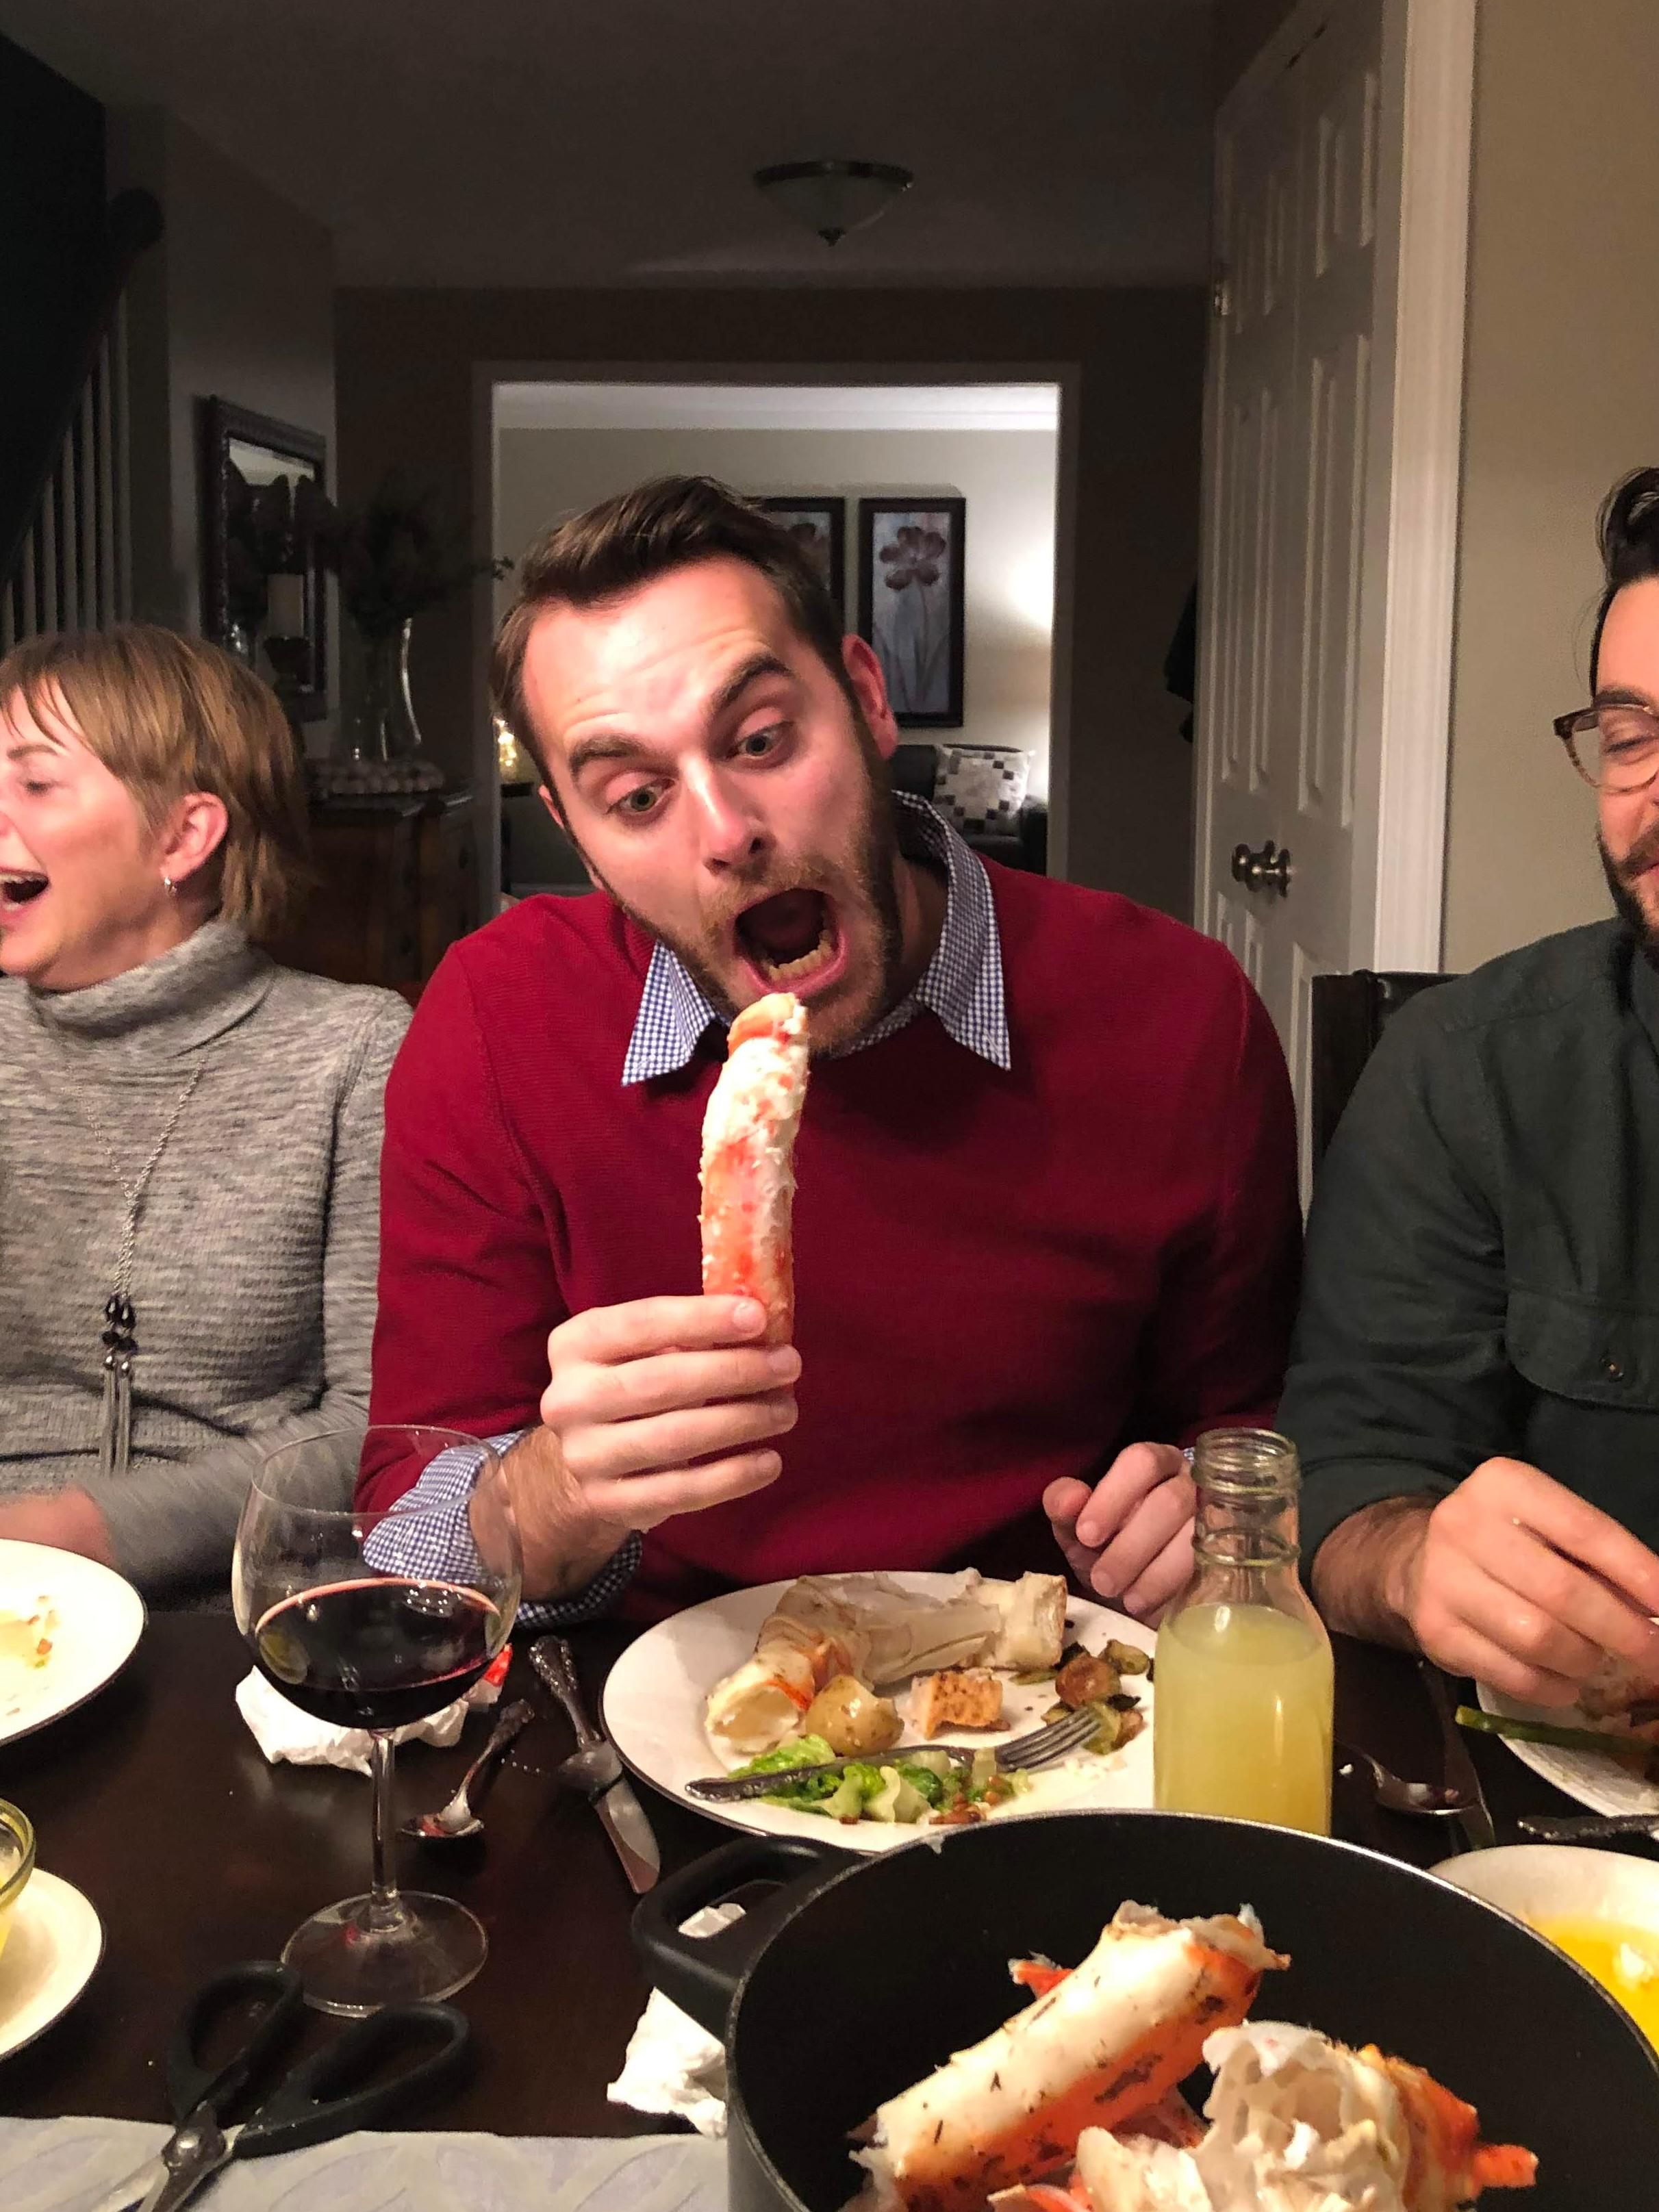 Pulled out this unbelievably phallic crab leg at my mom's birthday dinner. Finally understanding why she requests crab every year.